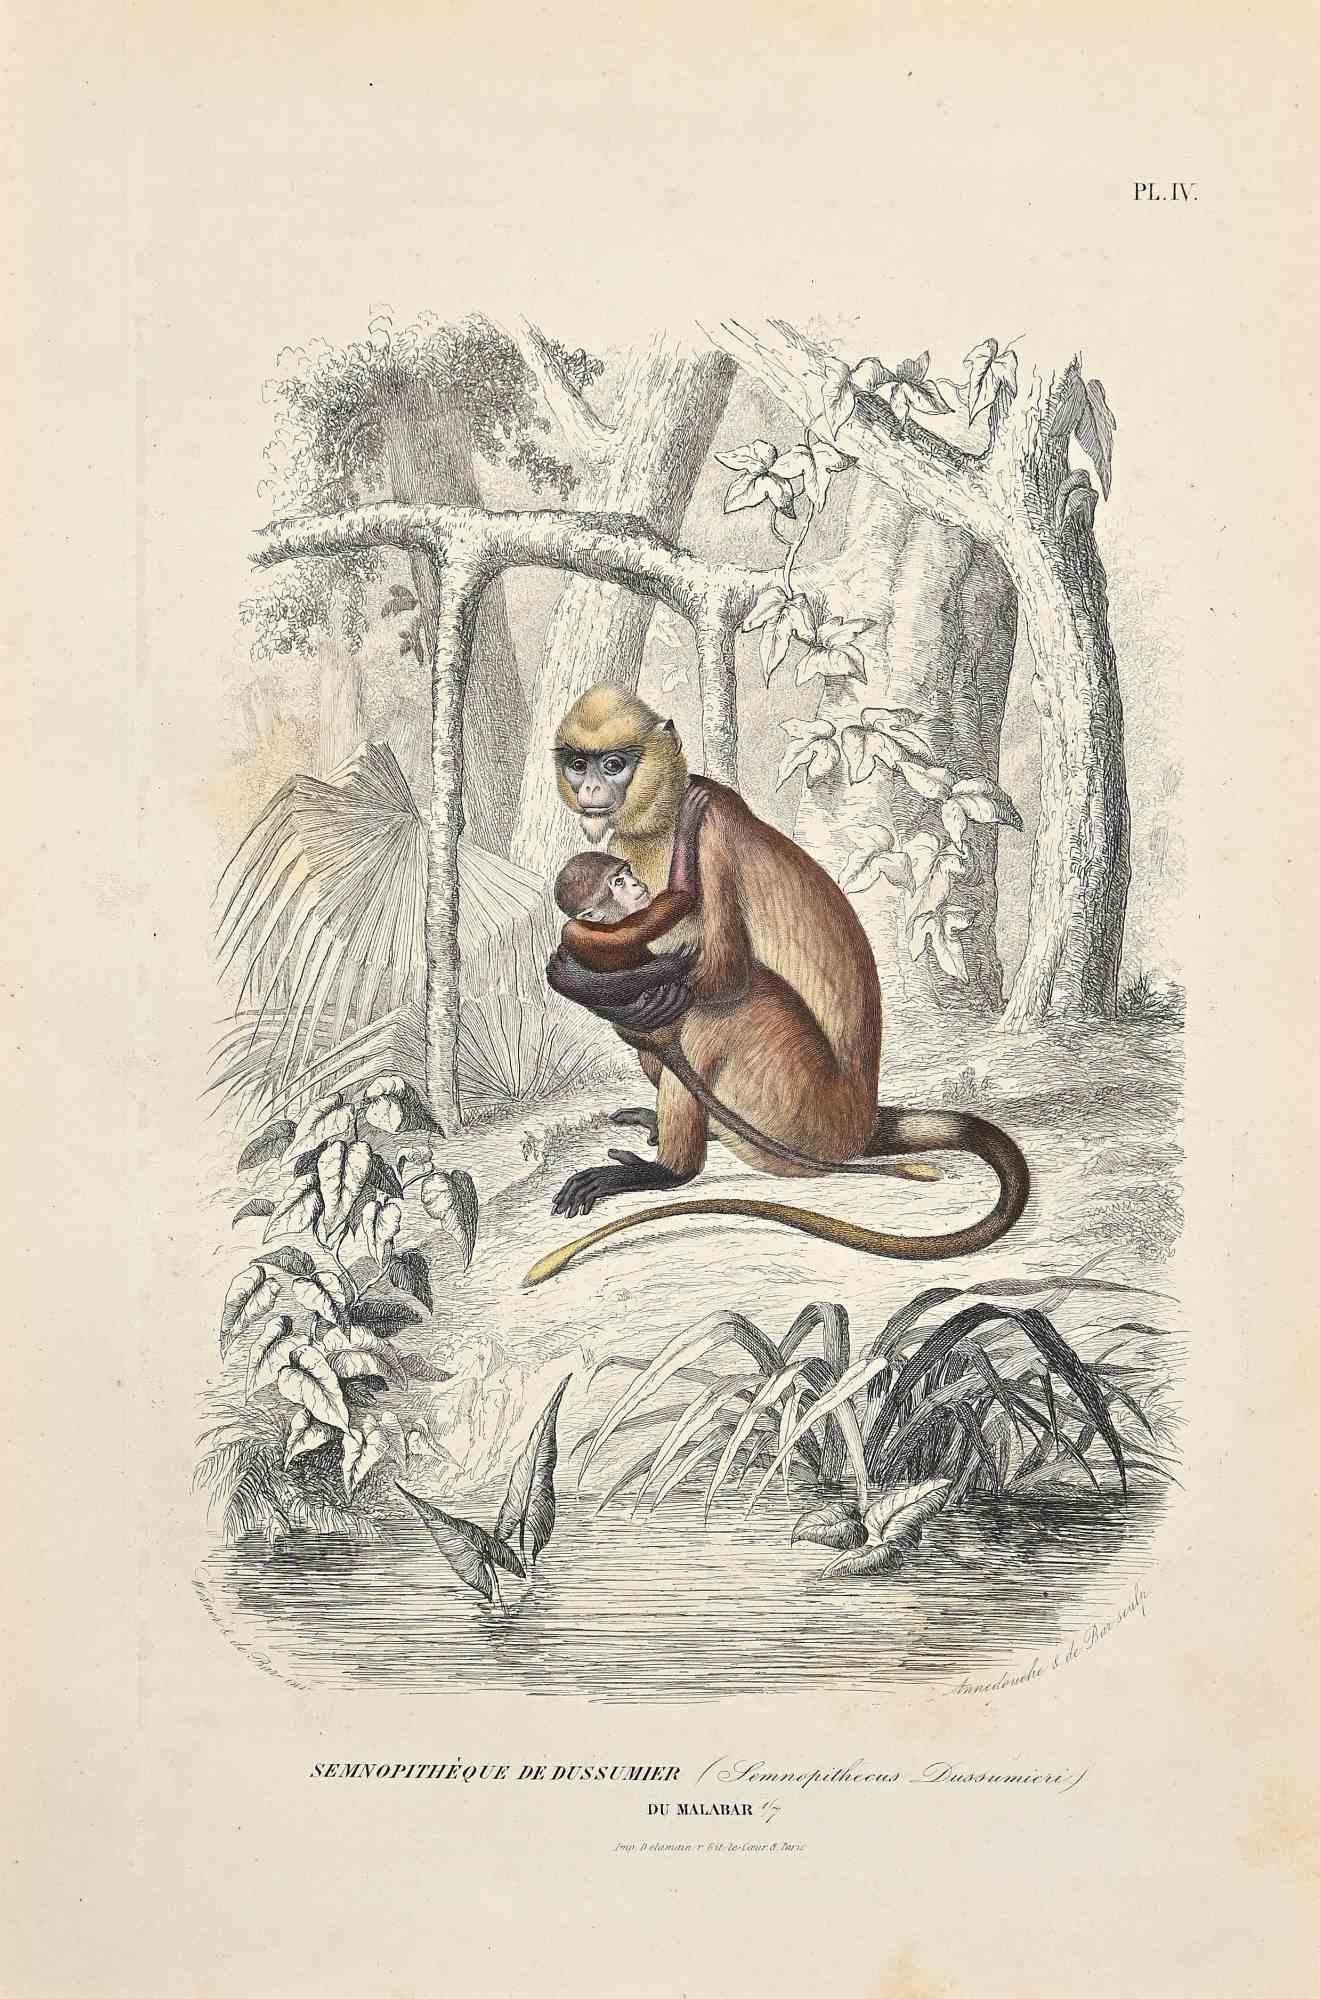 Semnopitheque de Dussumier is an original lithograph on ivory-colored paper, realized by Paul Gervais (1816-1879). The artwork is from The Series of "Les Trois Règnes de la Nature", and was published in 1854.

Good conditions except for some